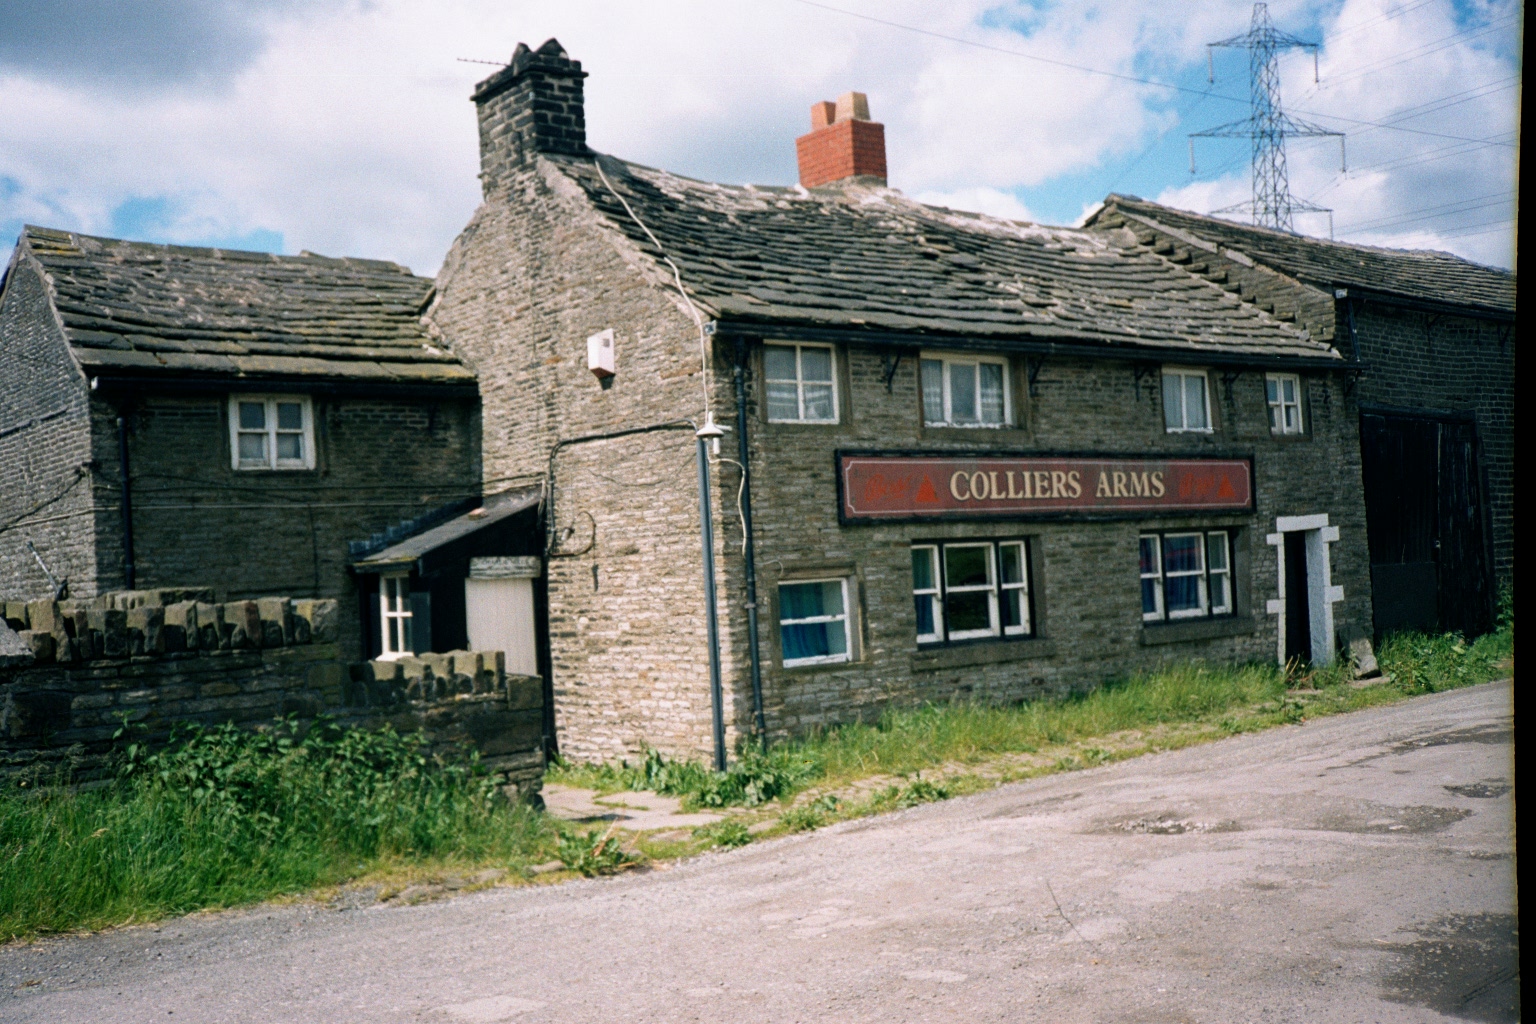 Colliers' Arms